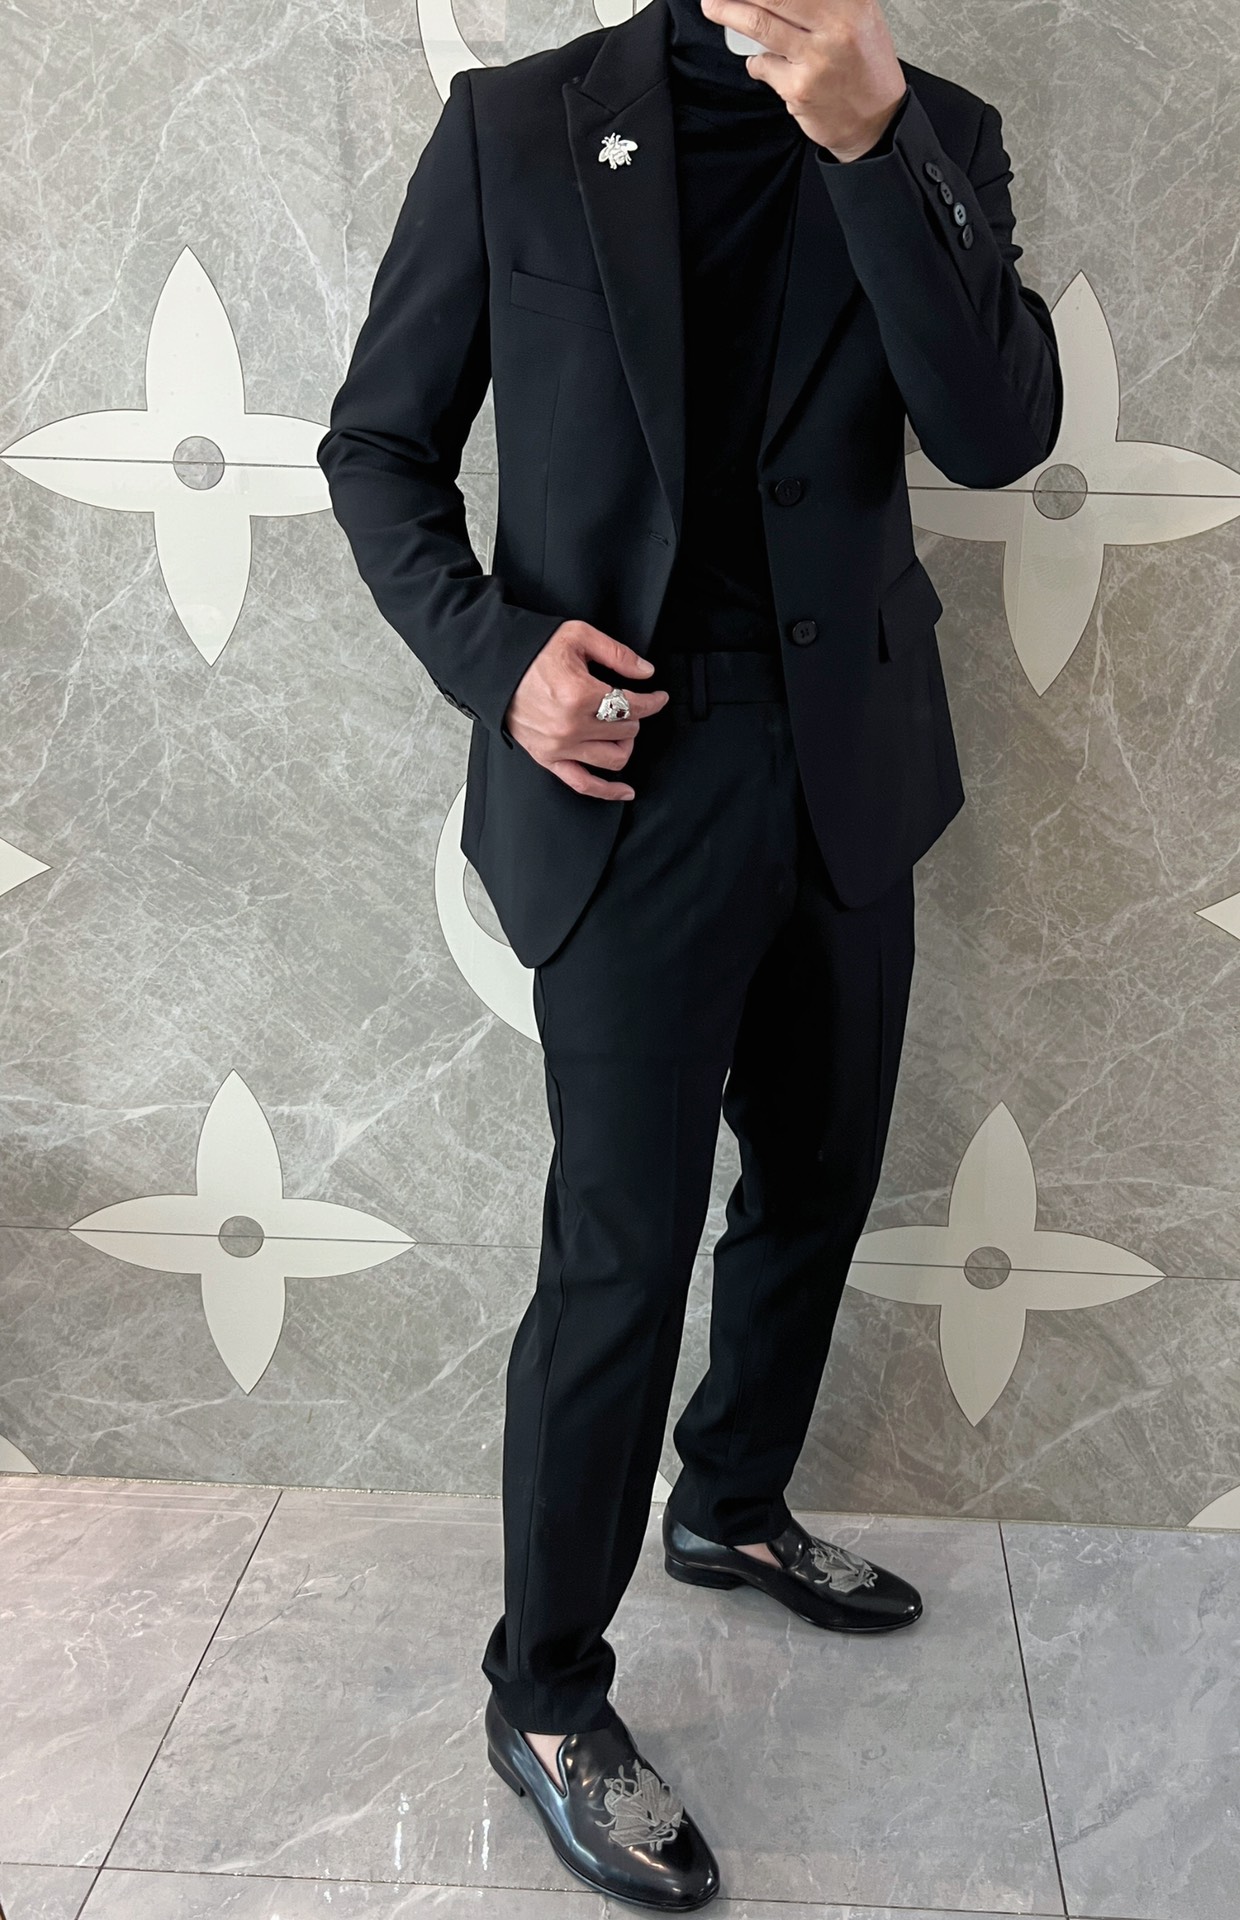 Christian Dior Business Suit